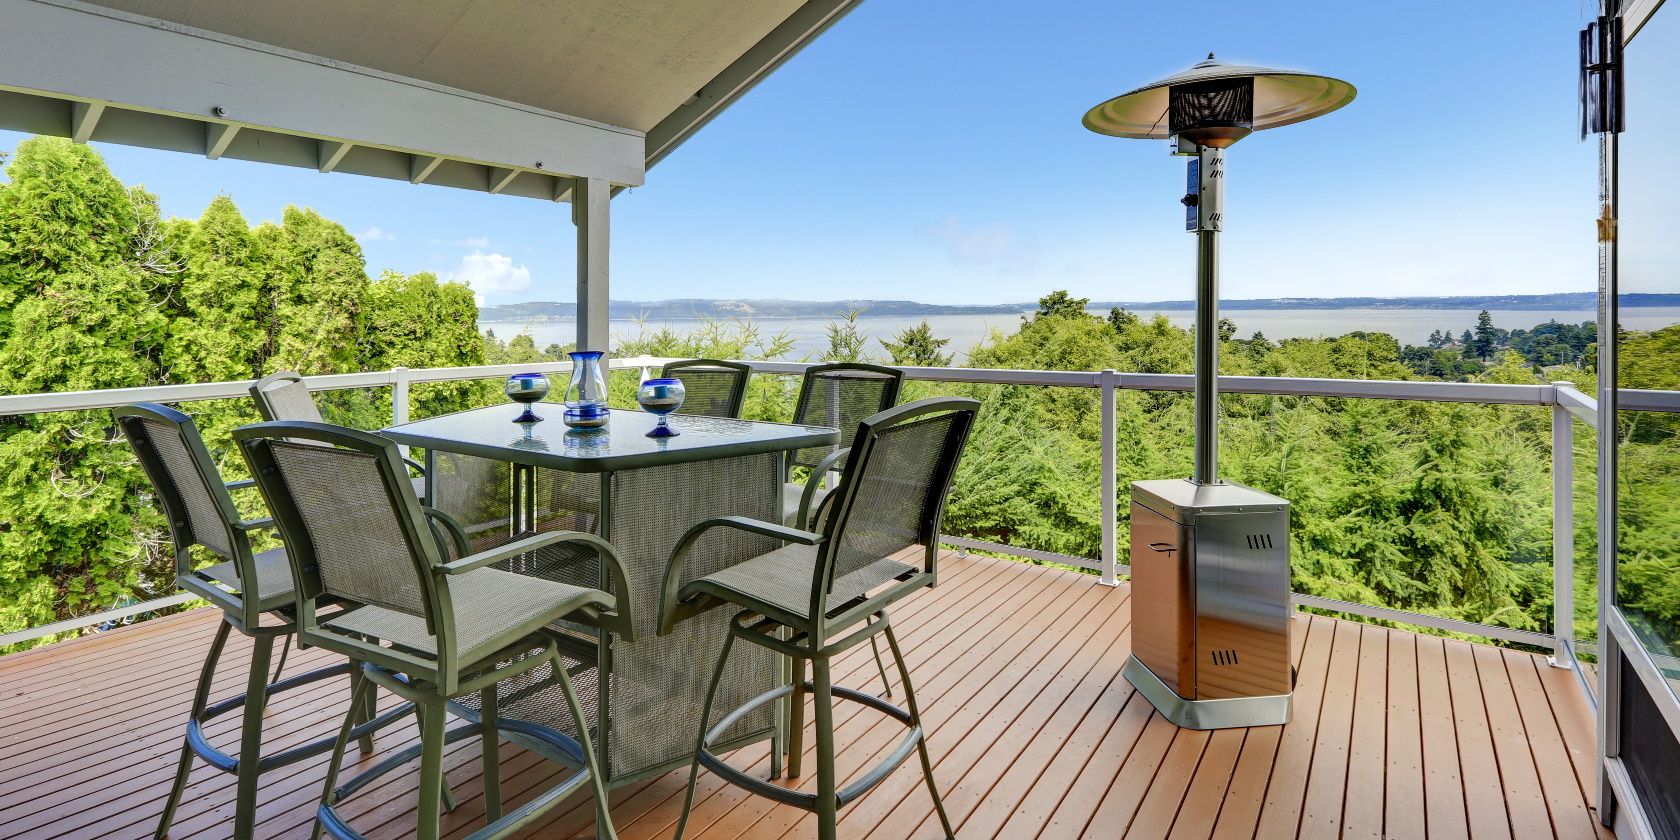 Patio area with table, chairs and heater on walkout deck overlooking scenic view